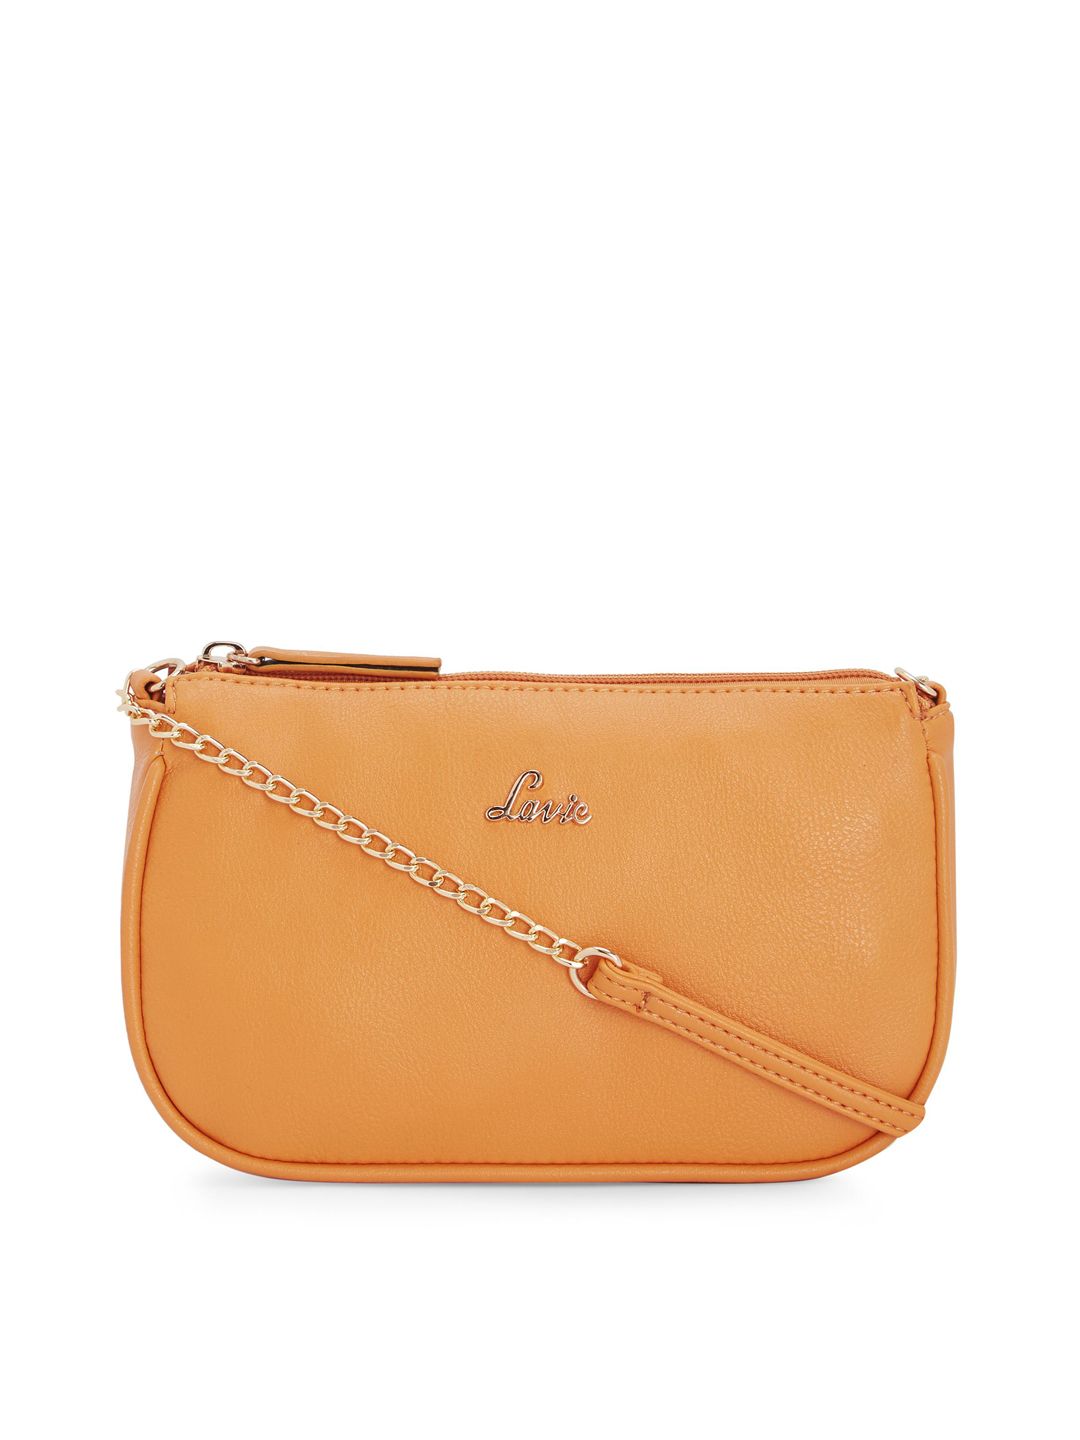 Lavie Mustard Yellow Solid Sling Bag Price in India